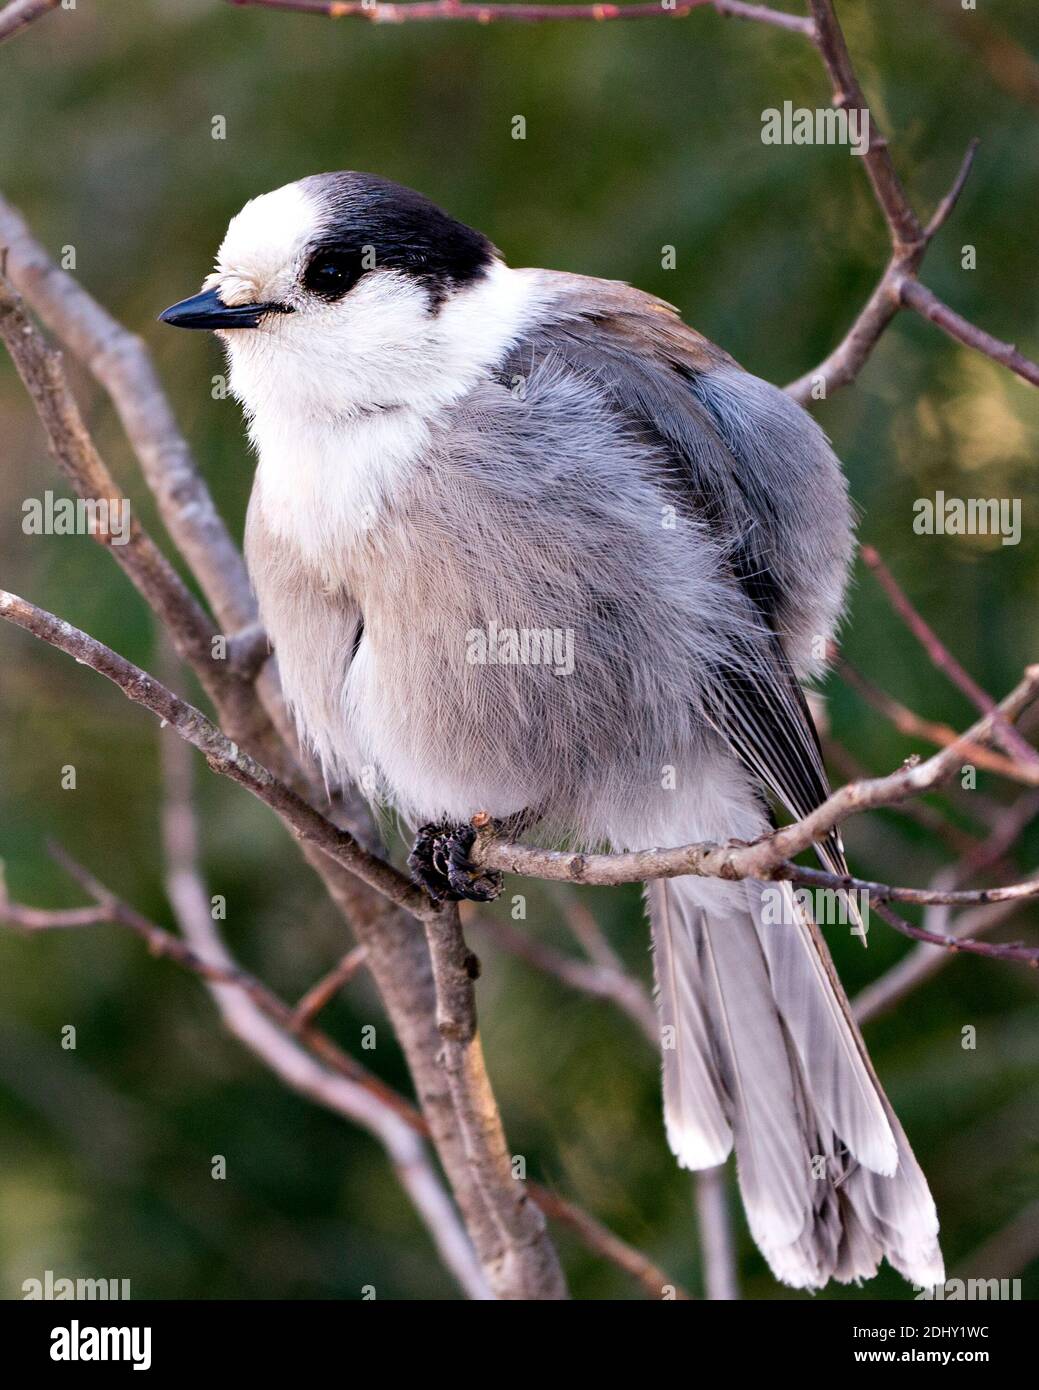 Gray Jay close-up profile view perched on a tree branch in its environment and habitat, displaying a ball of grey feather plumage and bird tail. Stock Photo